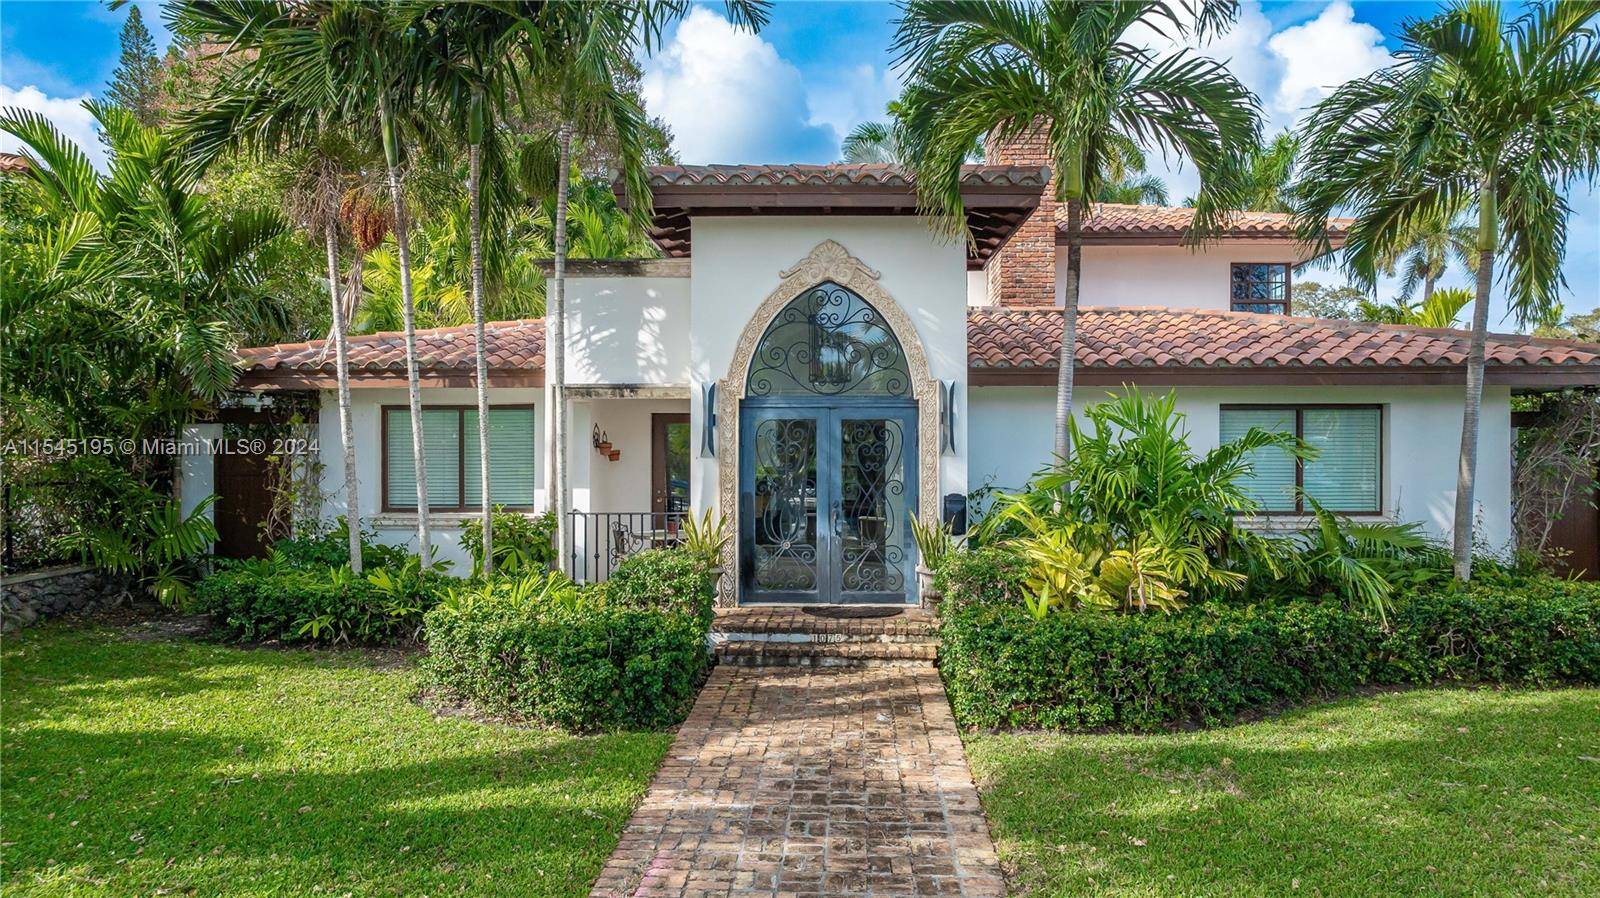 Waterfront, Spanish style 5 bed 4 bath home with direct ocean access no fixed bridges 55 ft waterfront with 4 boat slips 12 w x 40 length each slip nestled ...